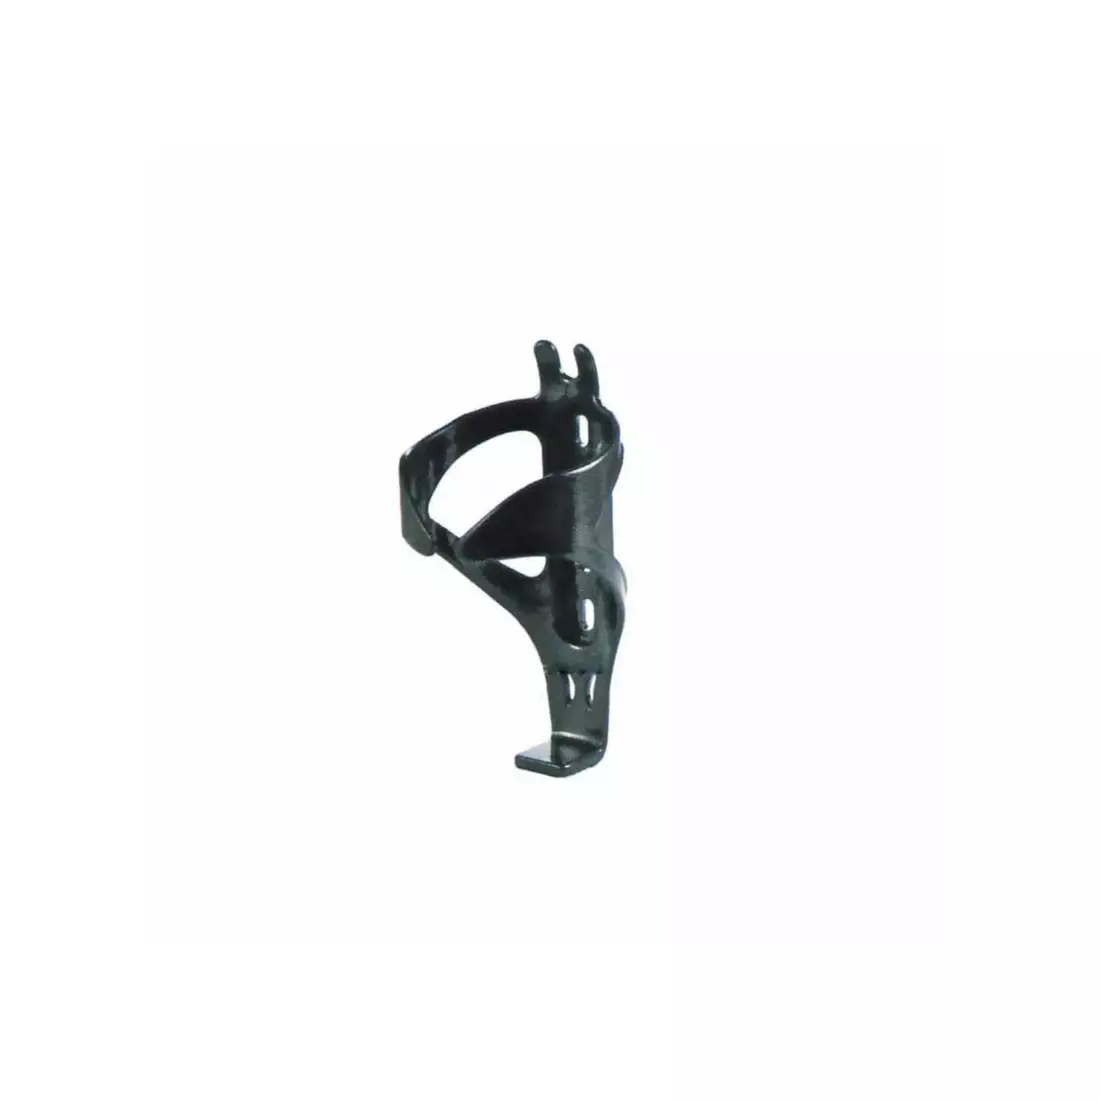 SPENCER bicycle water bottle cage JY-9002/BC18, nylon, black